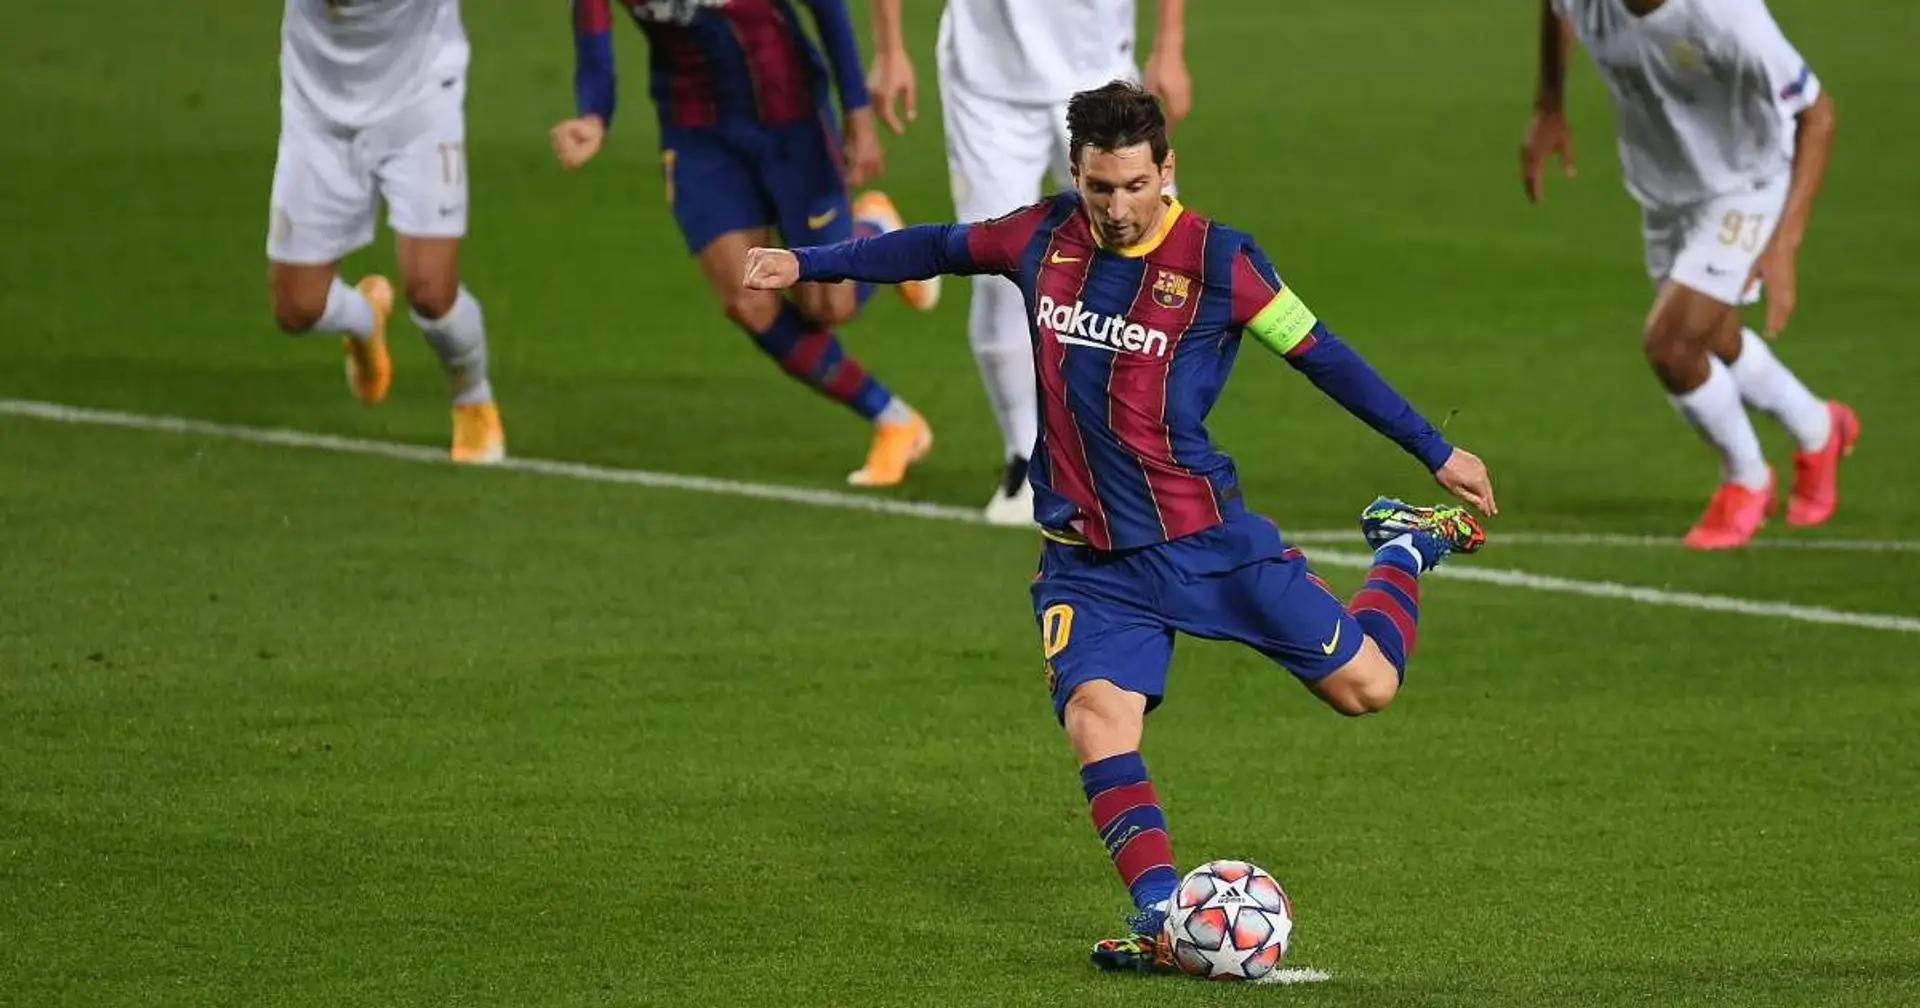 Sweet sixteen: Lionel Messi becomes 1st player in history to score in 16 consecutive Champions League seasons